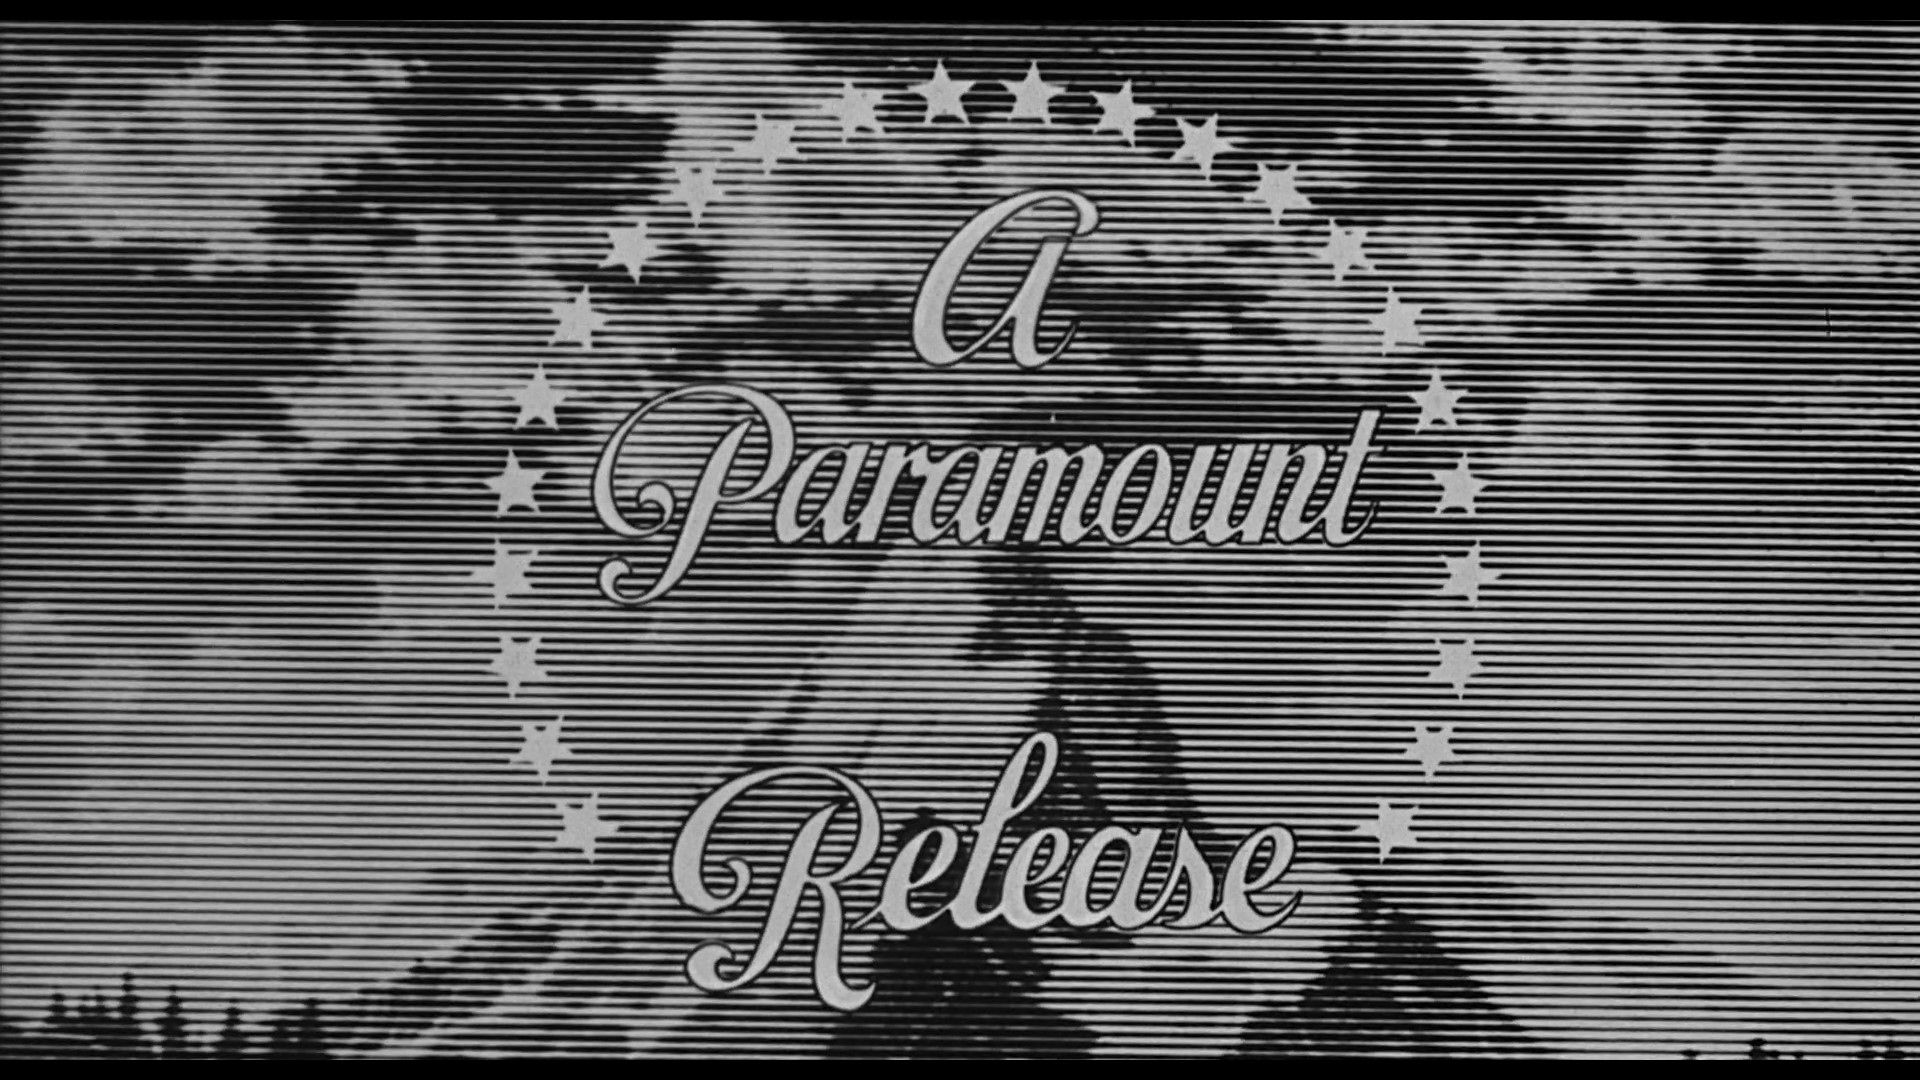 A Paramount Release (1960)